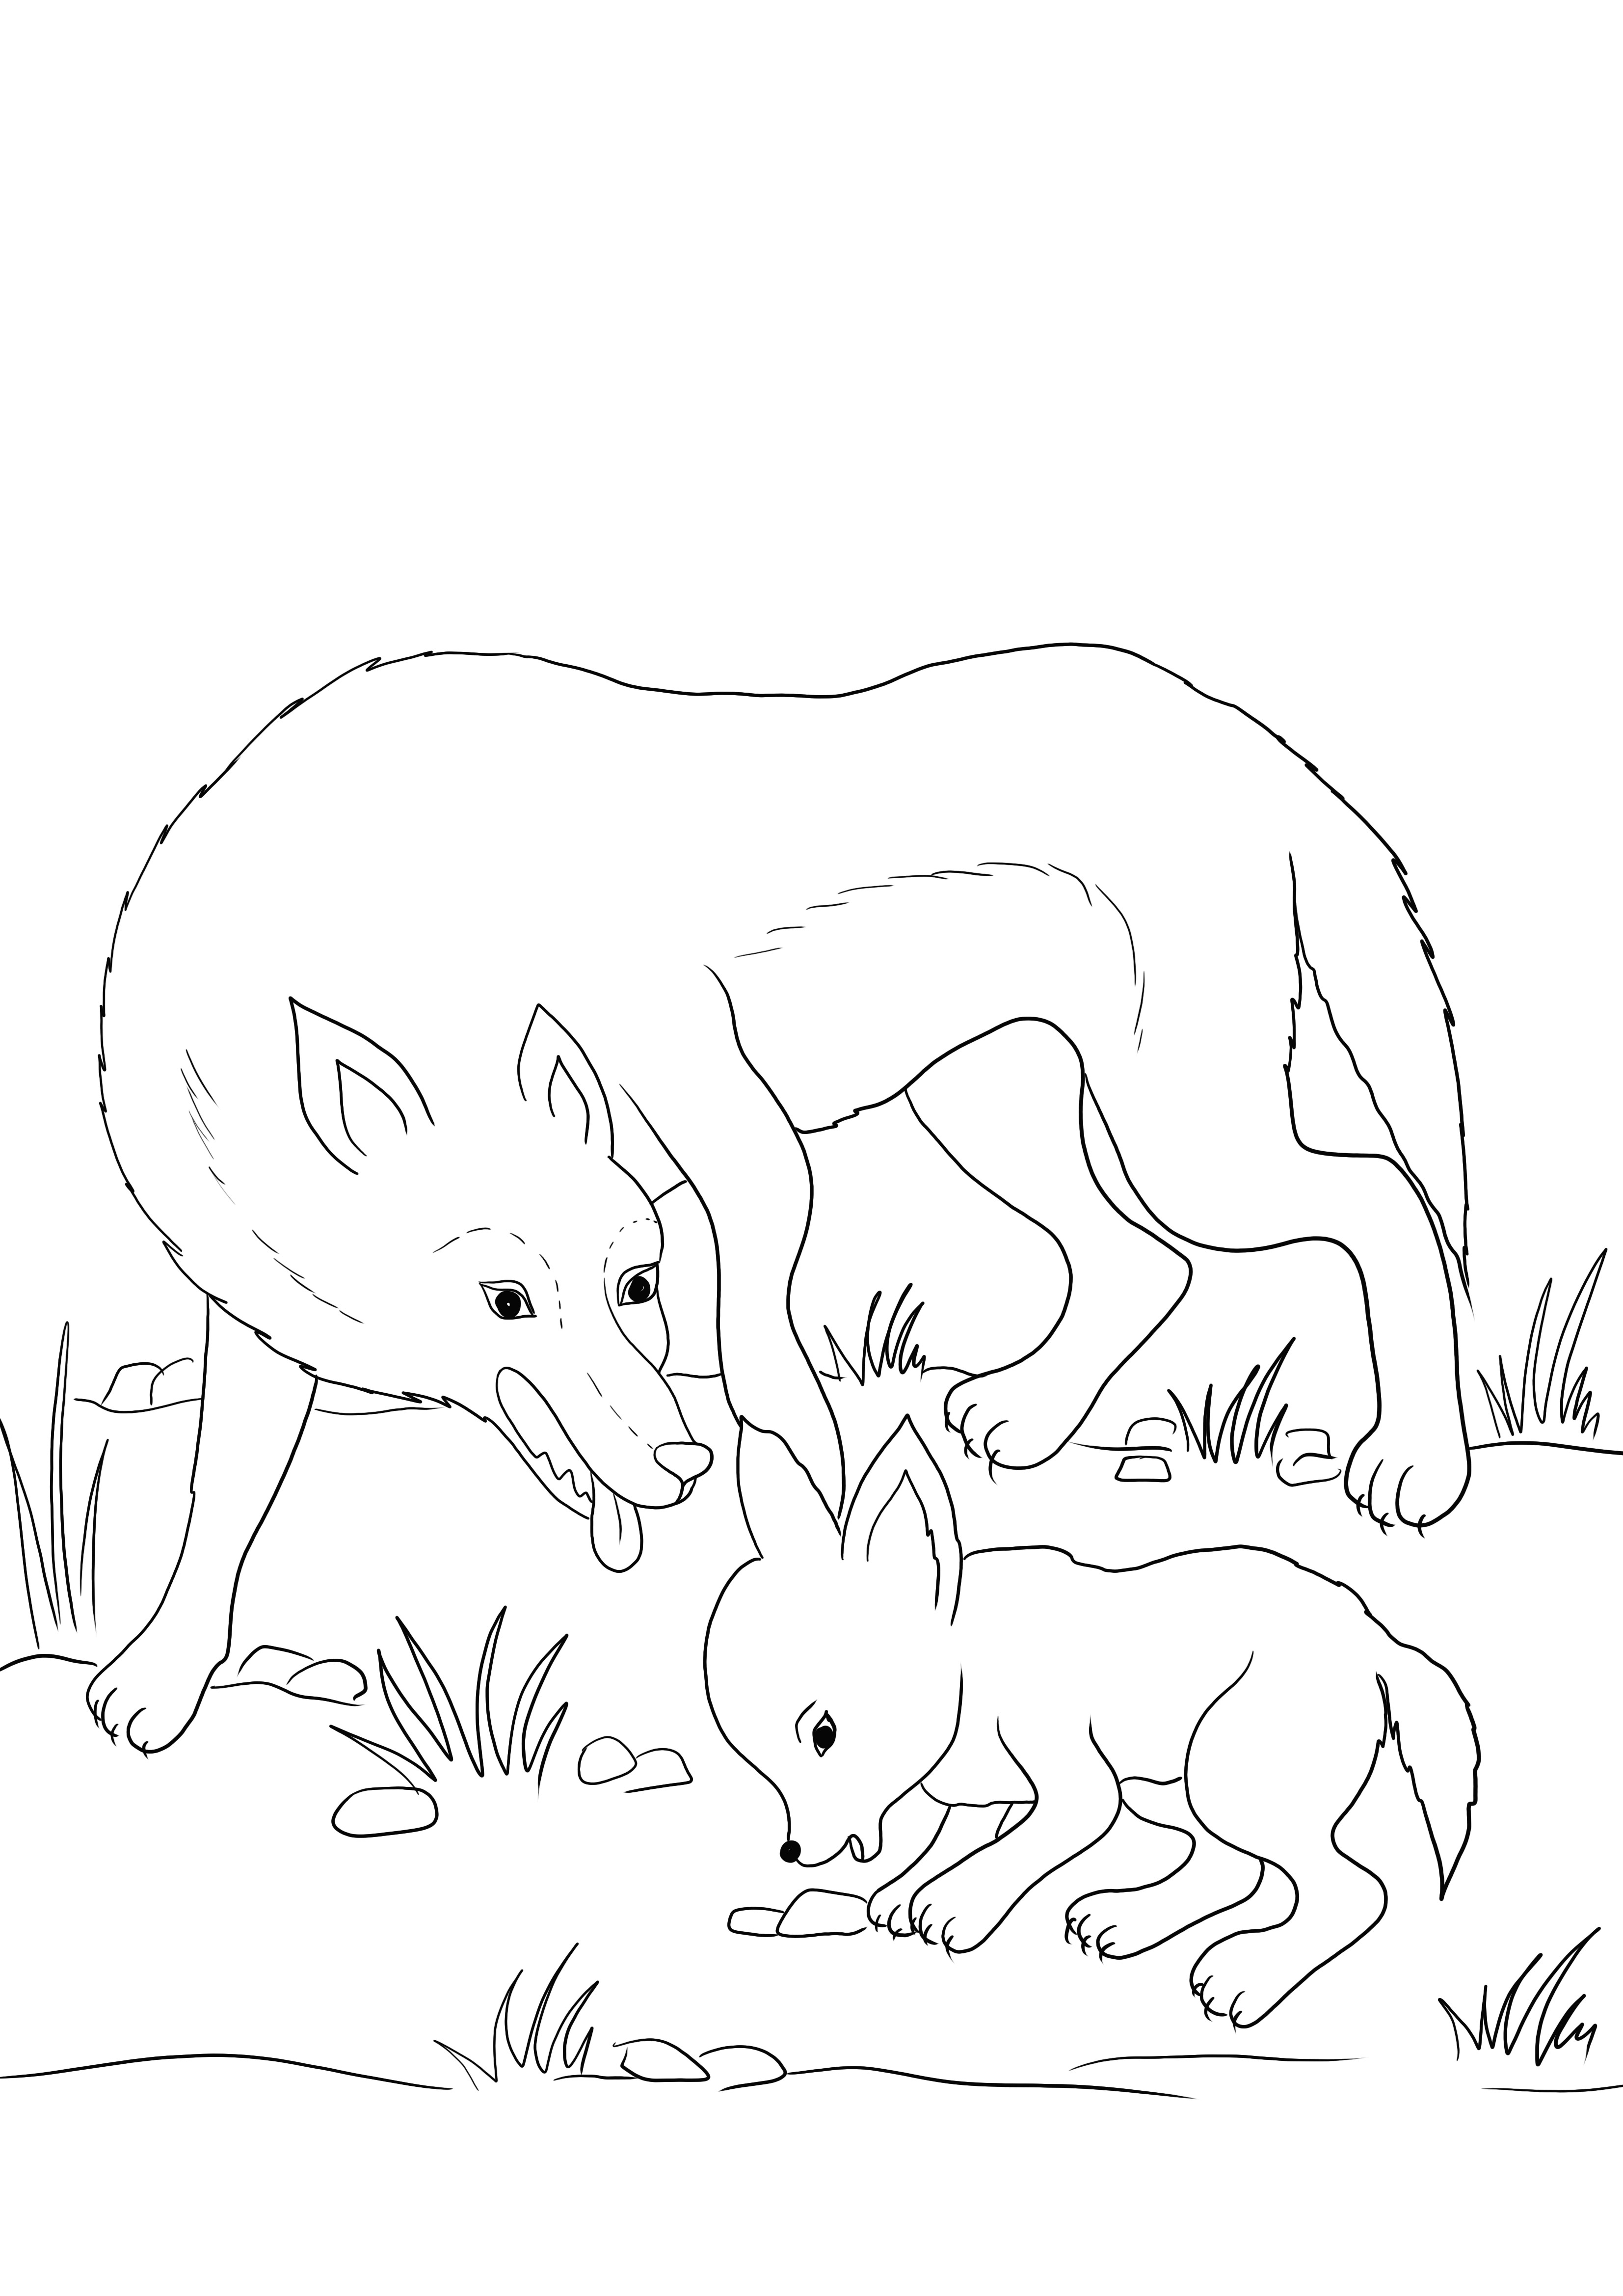 A Wolf Mother and Wolf Cub going together coloring and free downloading